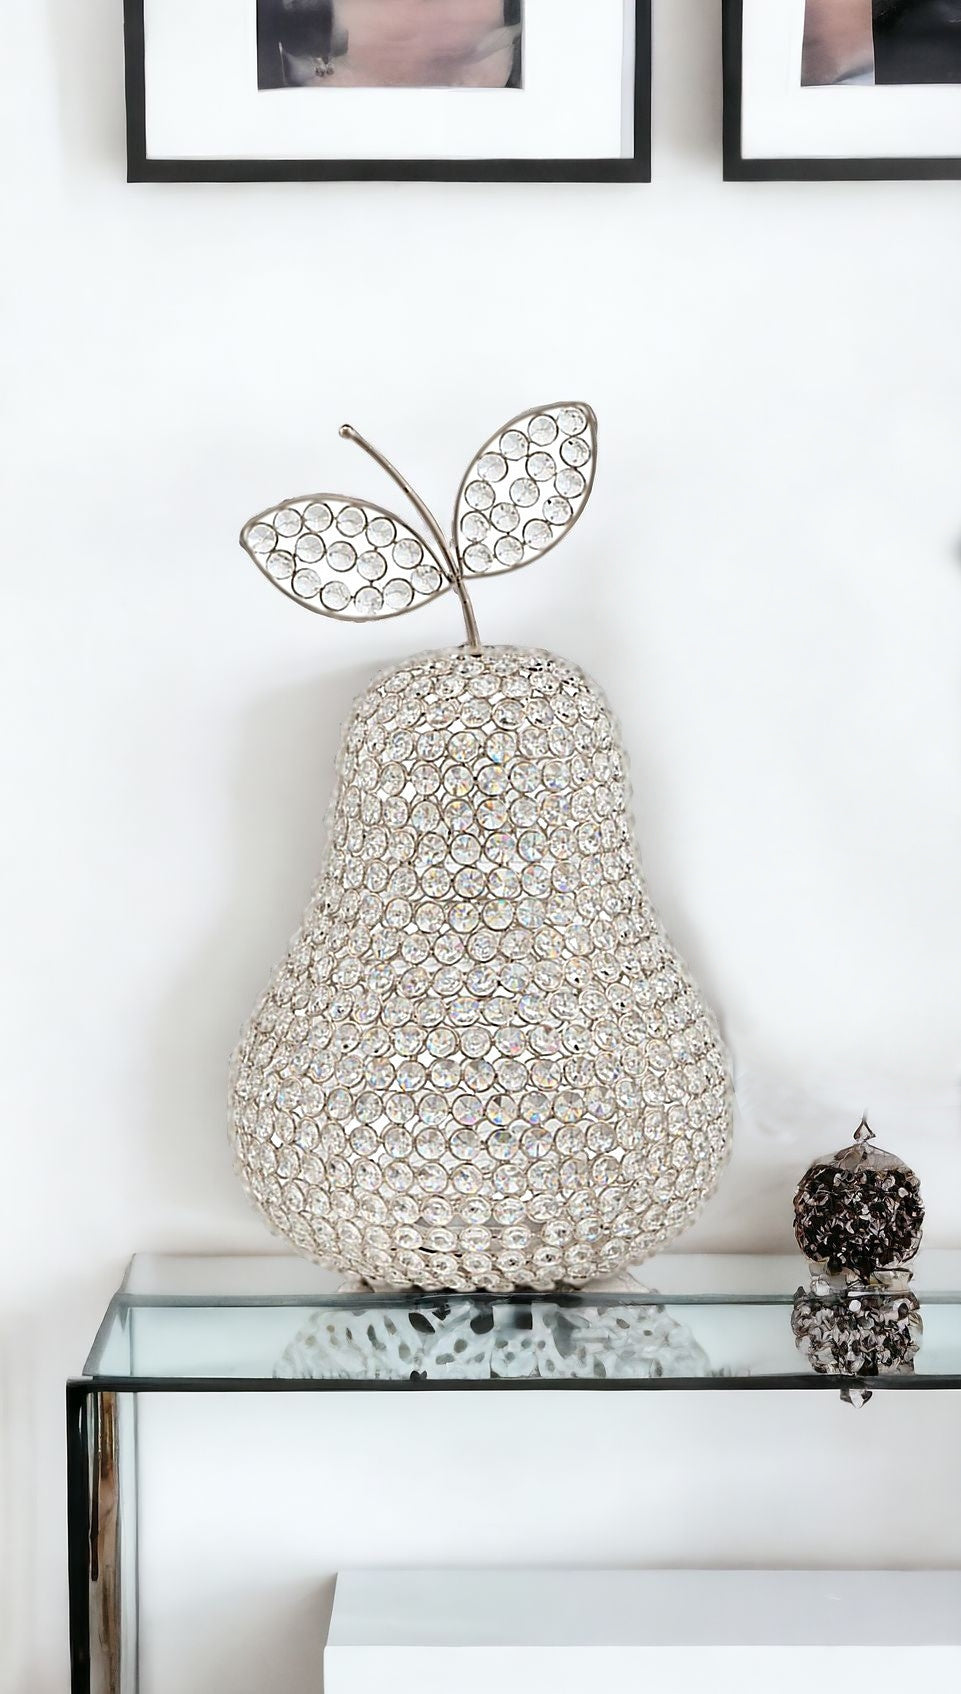 17.5" Jumbo Faux Crystal Silver Pear Sculpture